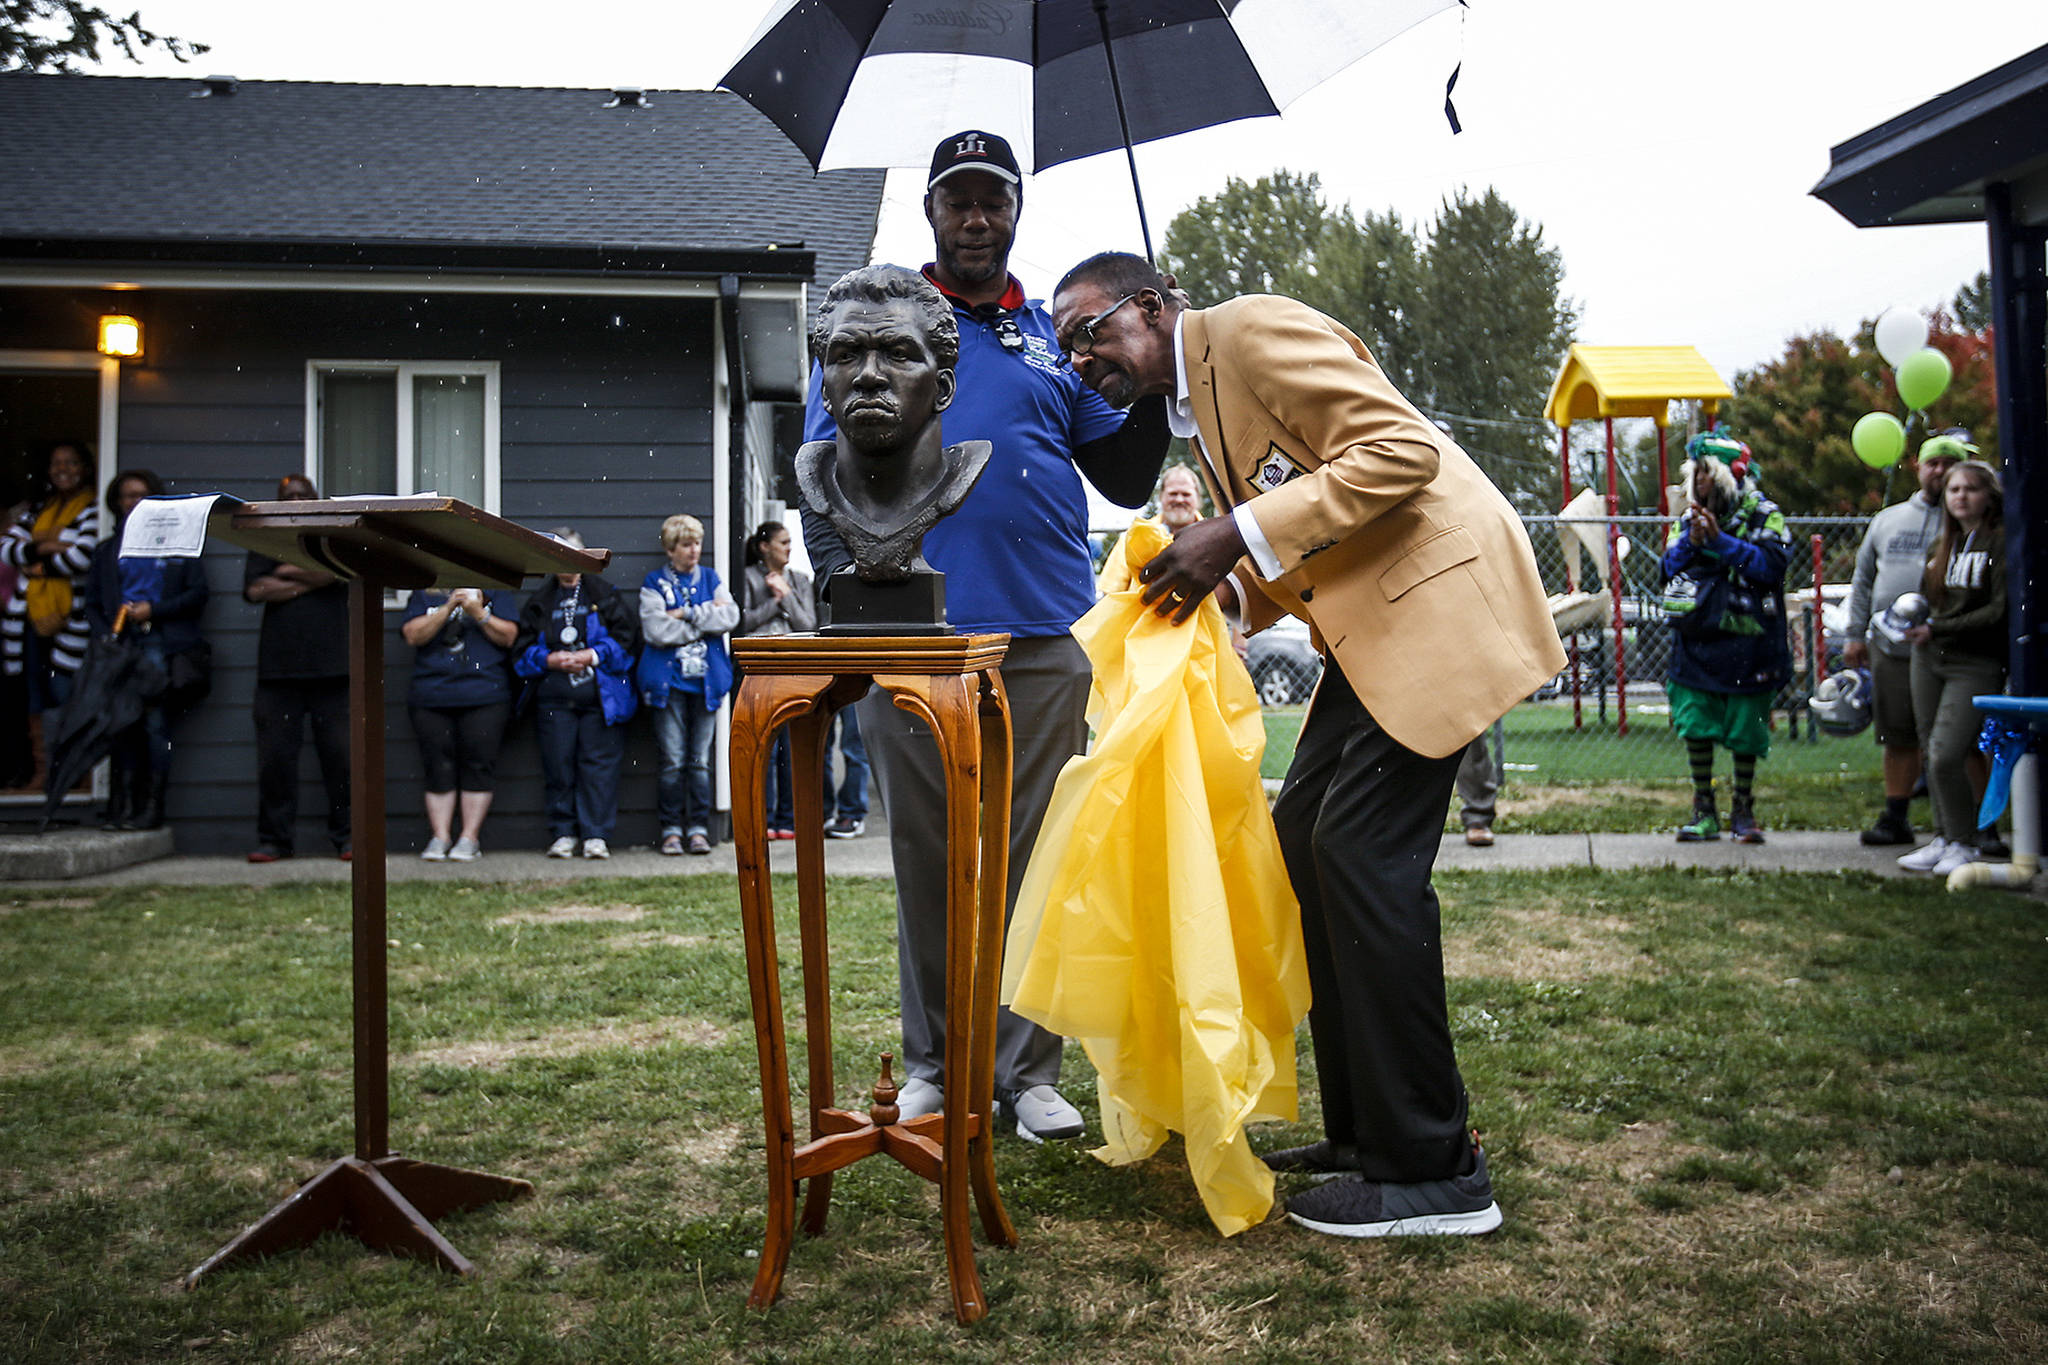 Recent Pro Football Hall of Fame inductee and former Seahawks safety, Kenny Easley, checks out a replica bust of himself during a ceremony held in his honor at Greater Trinity Academy in Everett on Sept. 30, 2017. (Ian Terry / The Herald)